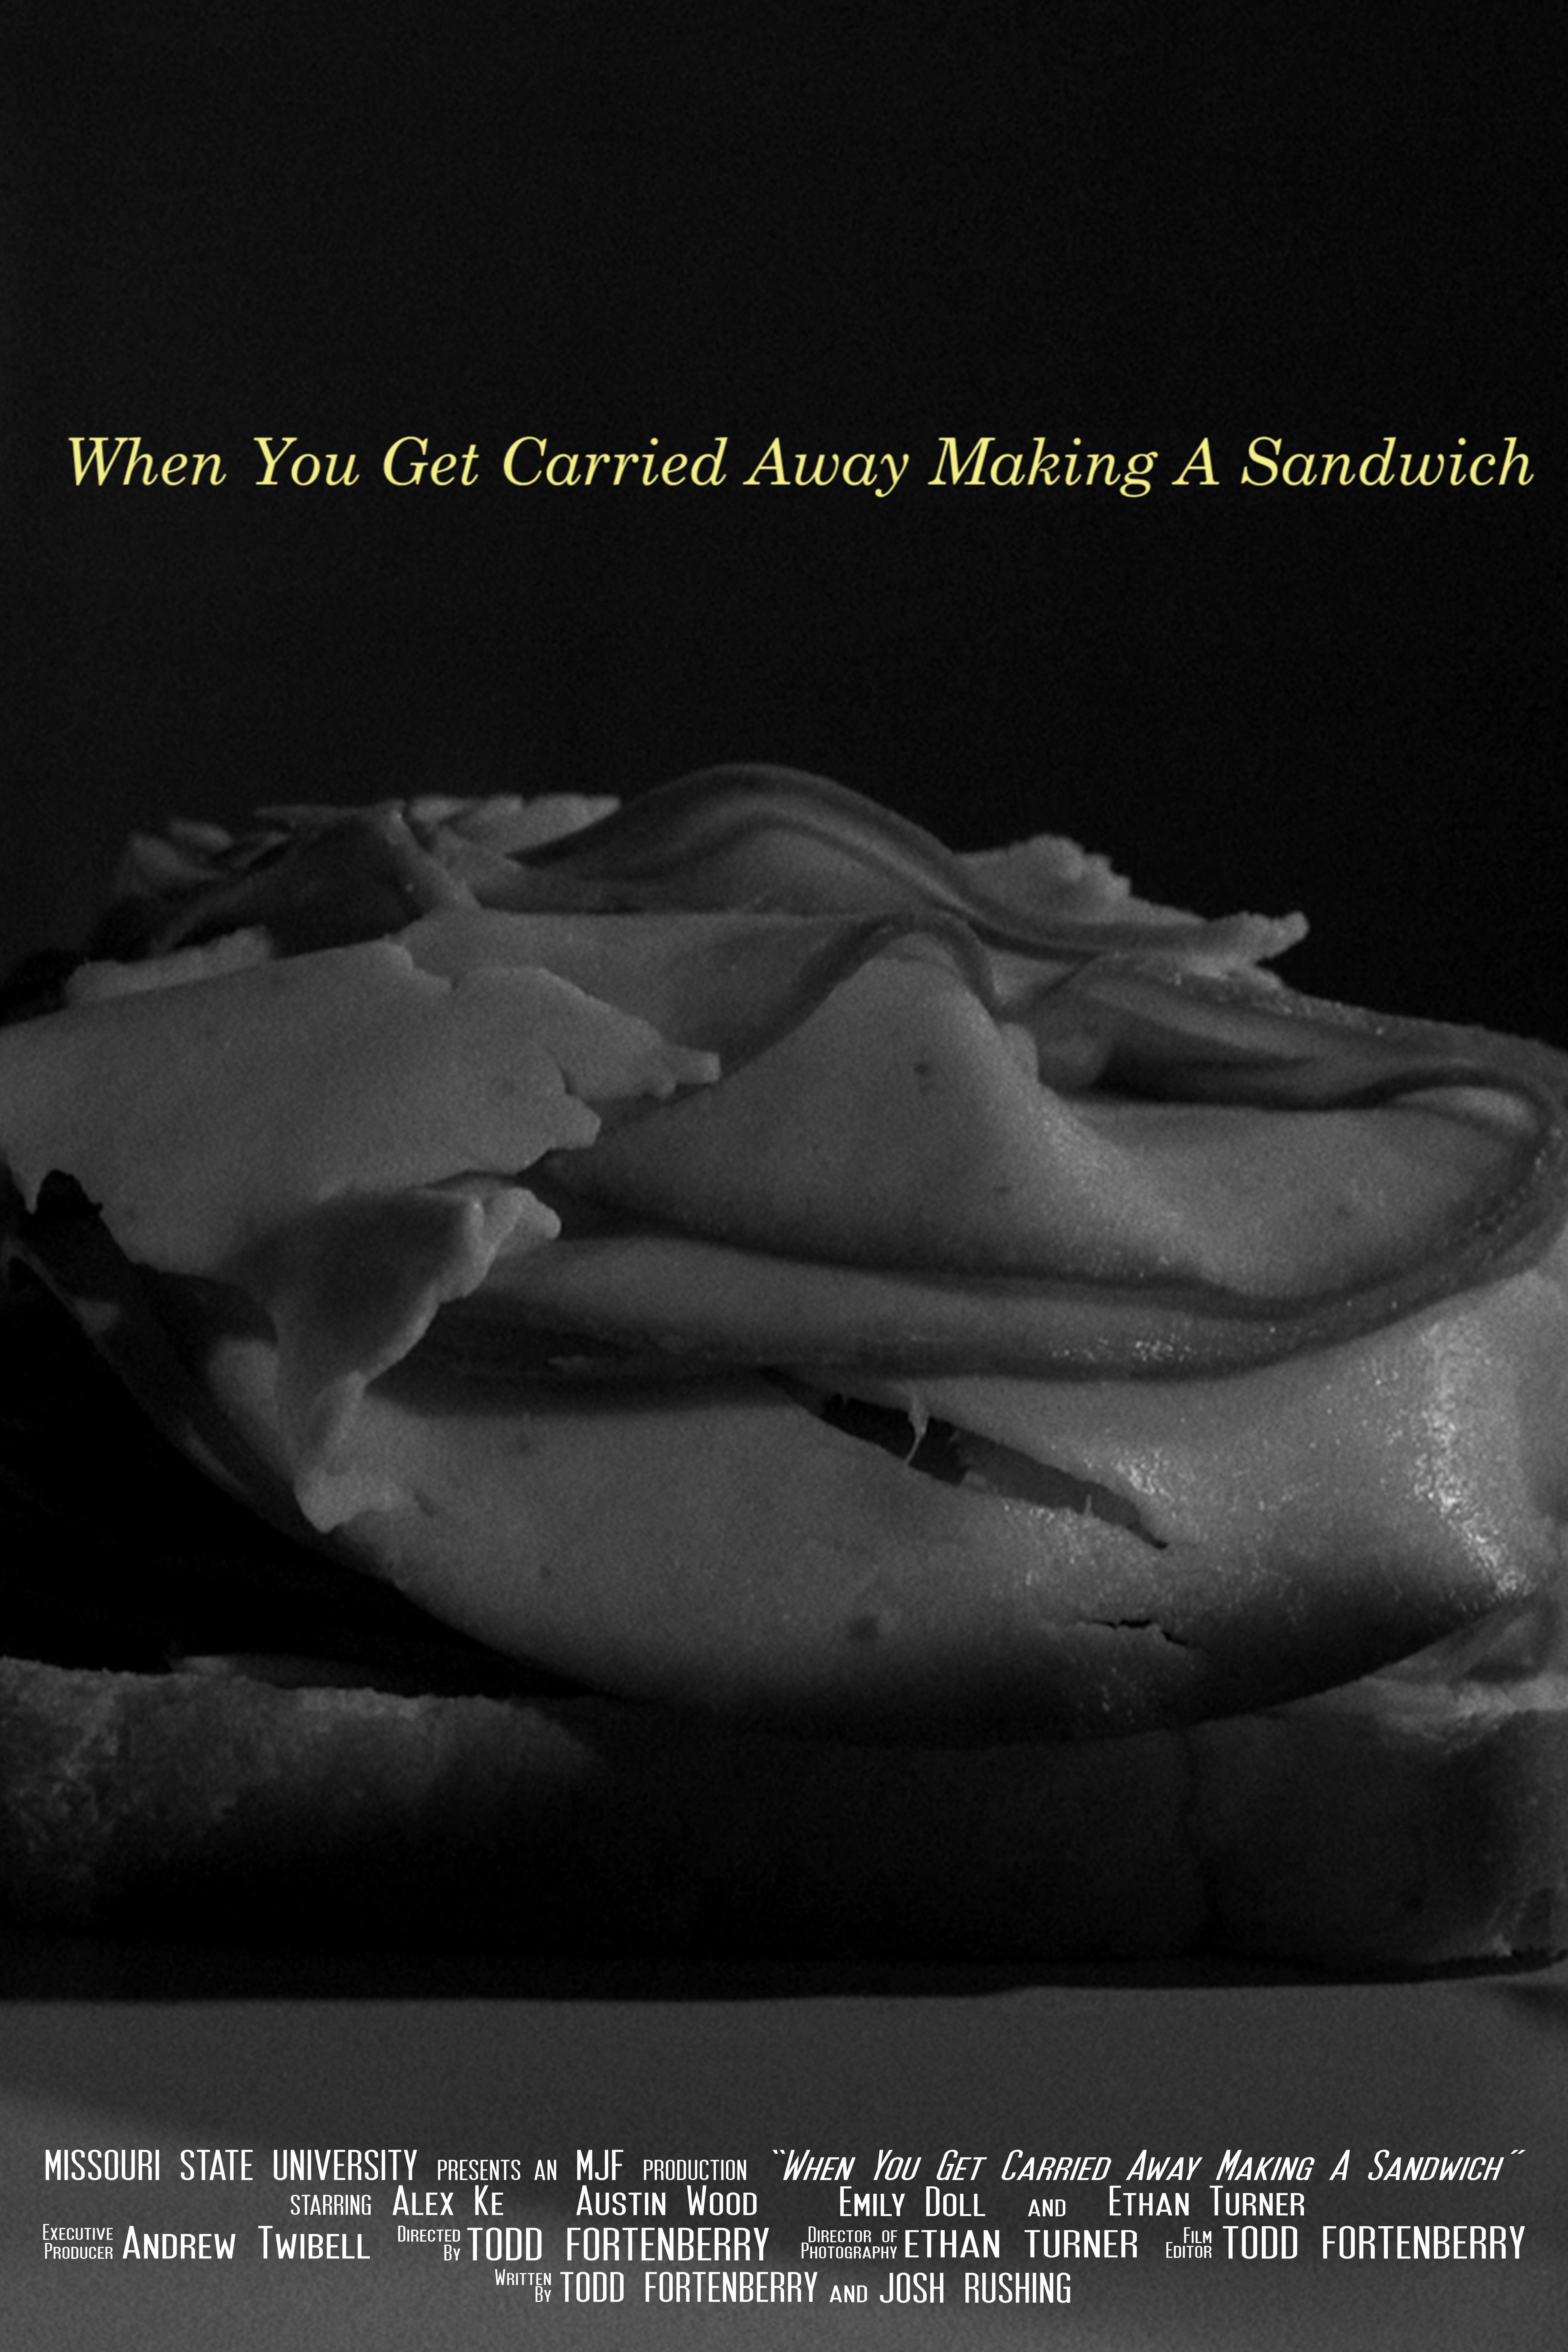 When You Get Carried Away Making a Sandwich